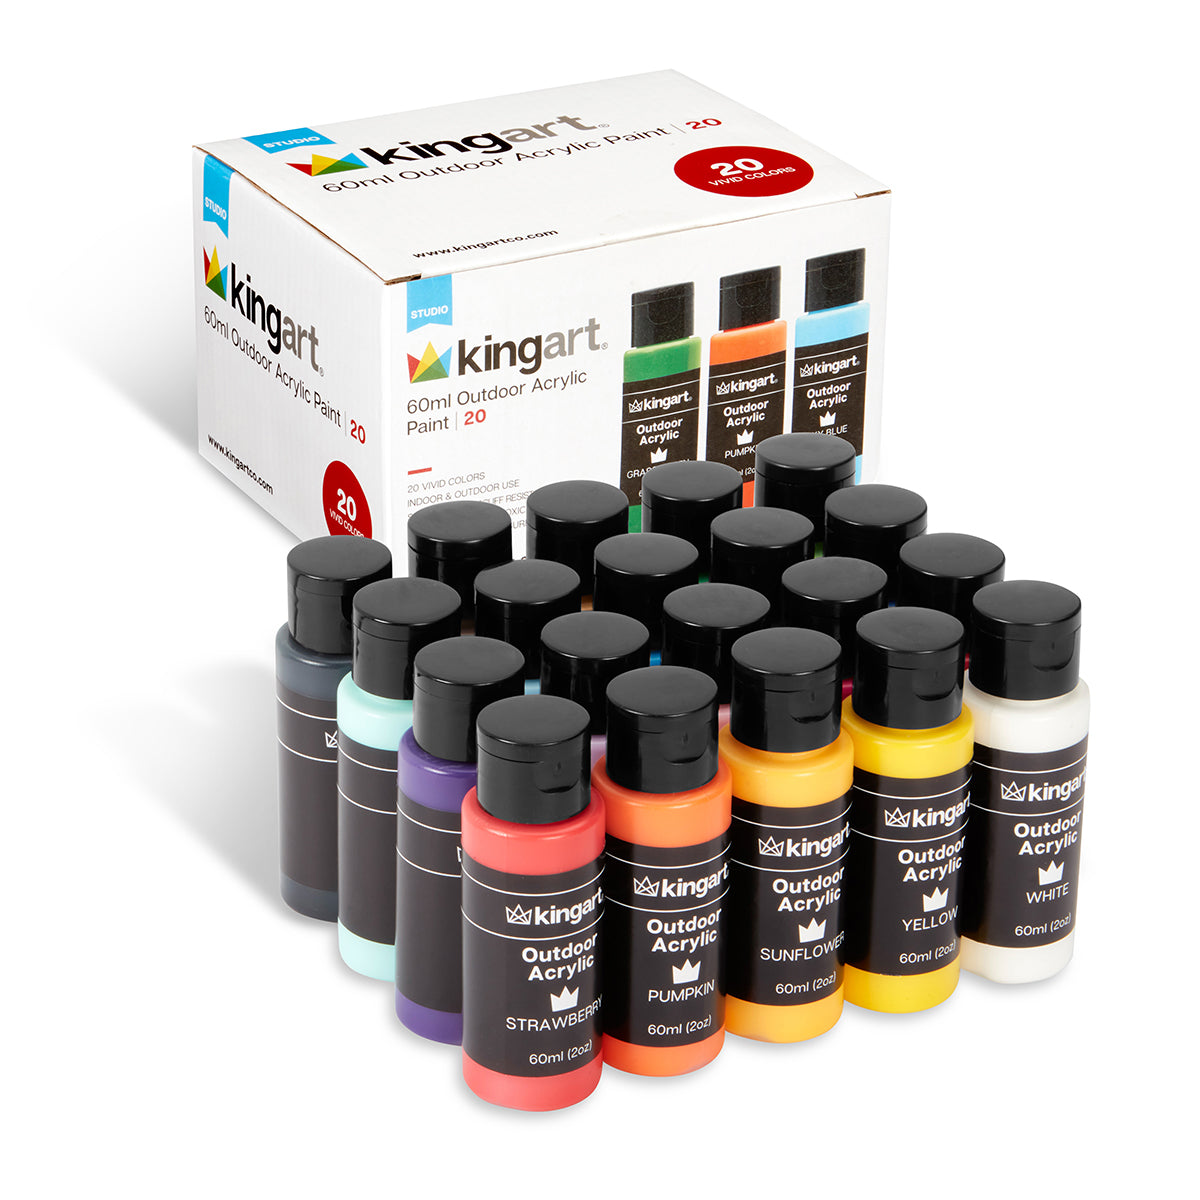 Metallic Acrylic Paint Set of Premium 24 Colors with 12 Brushes,Professional Grade Metallic Paints with Bottles (2fl oz 60ml), Rich Pigments of Non